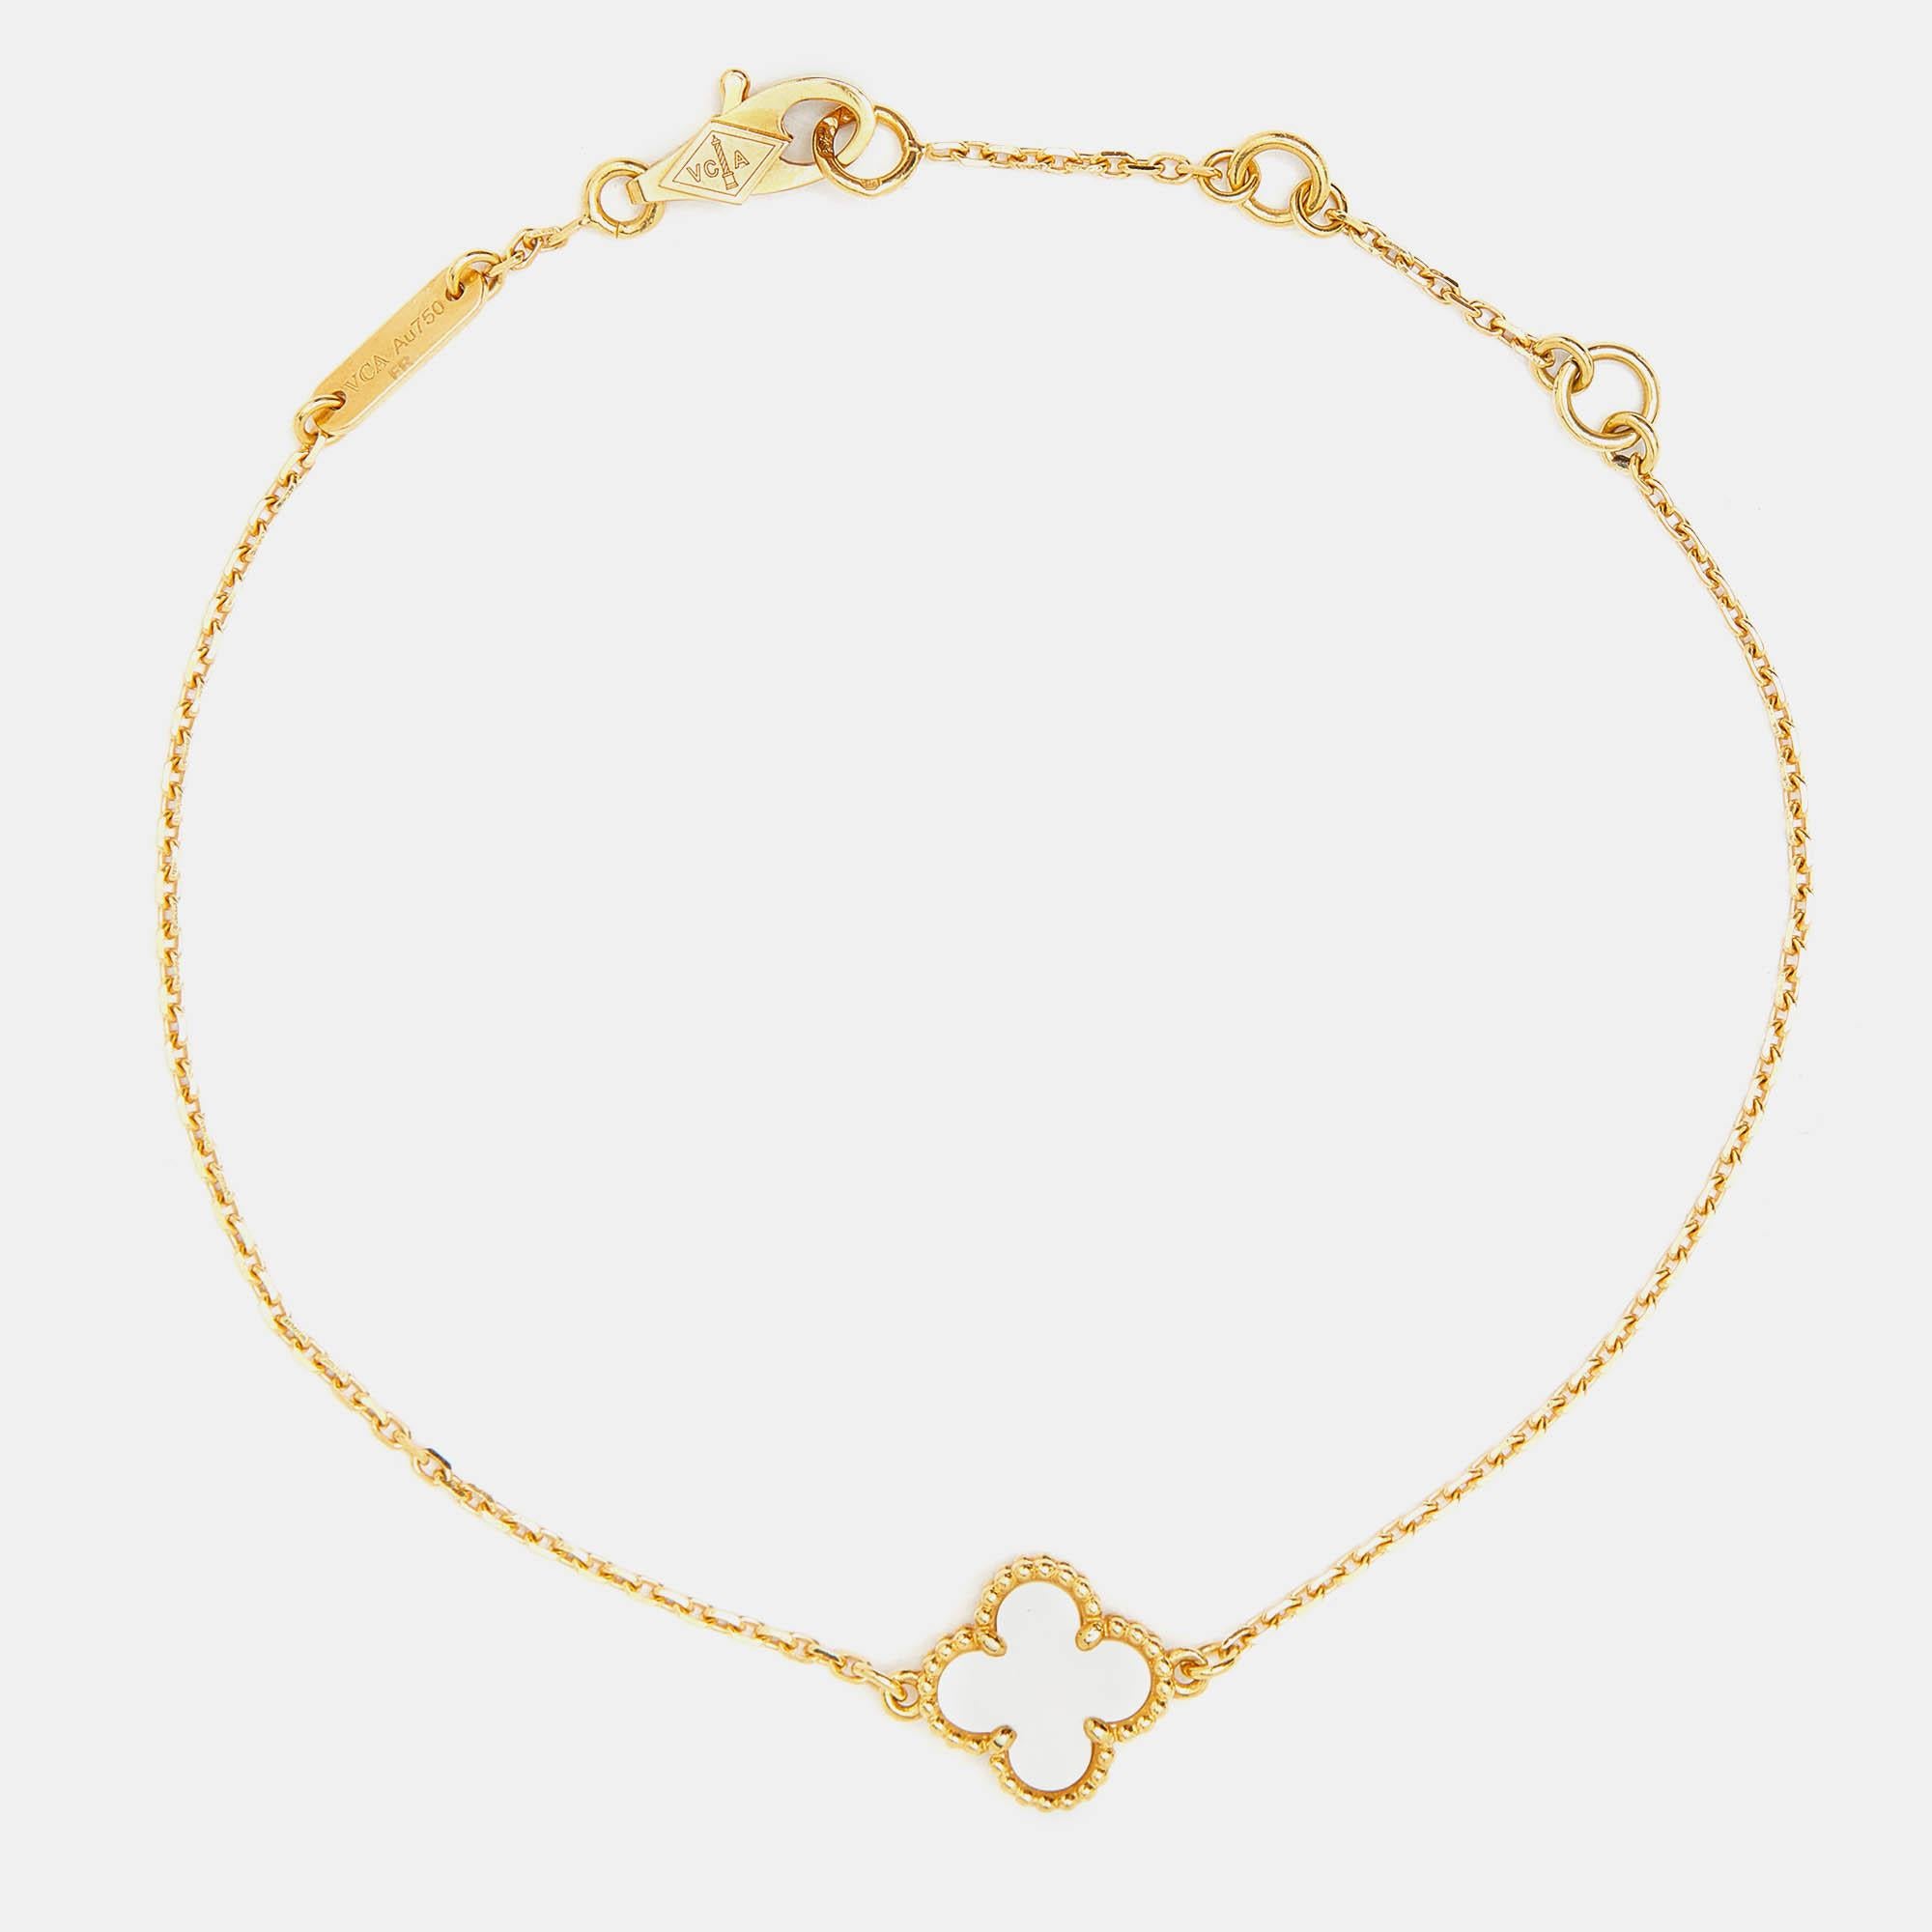 Invest in this opulent Van Cleef & Arpels bracelet from their iconic Sweet Alhambra collection. The 18k yellow gold Alhambra pendant is set with a mother of pearl and held by a chain. A sweet mix of minimalist style and timeless elegance sums up